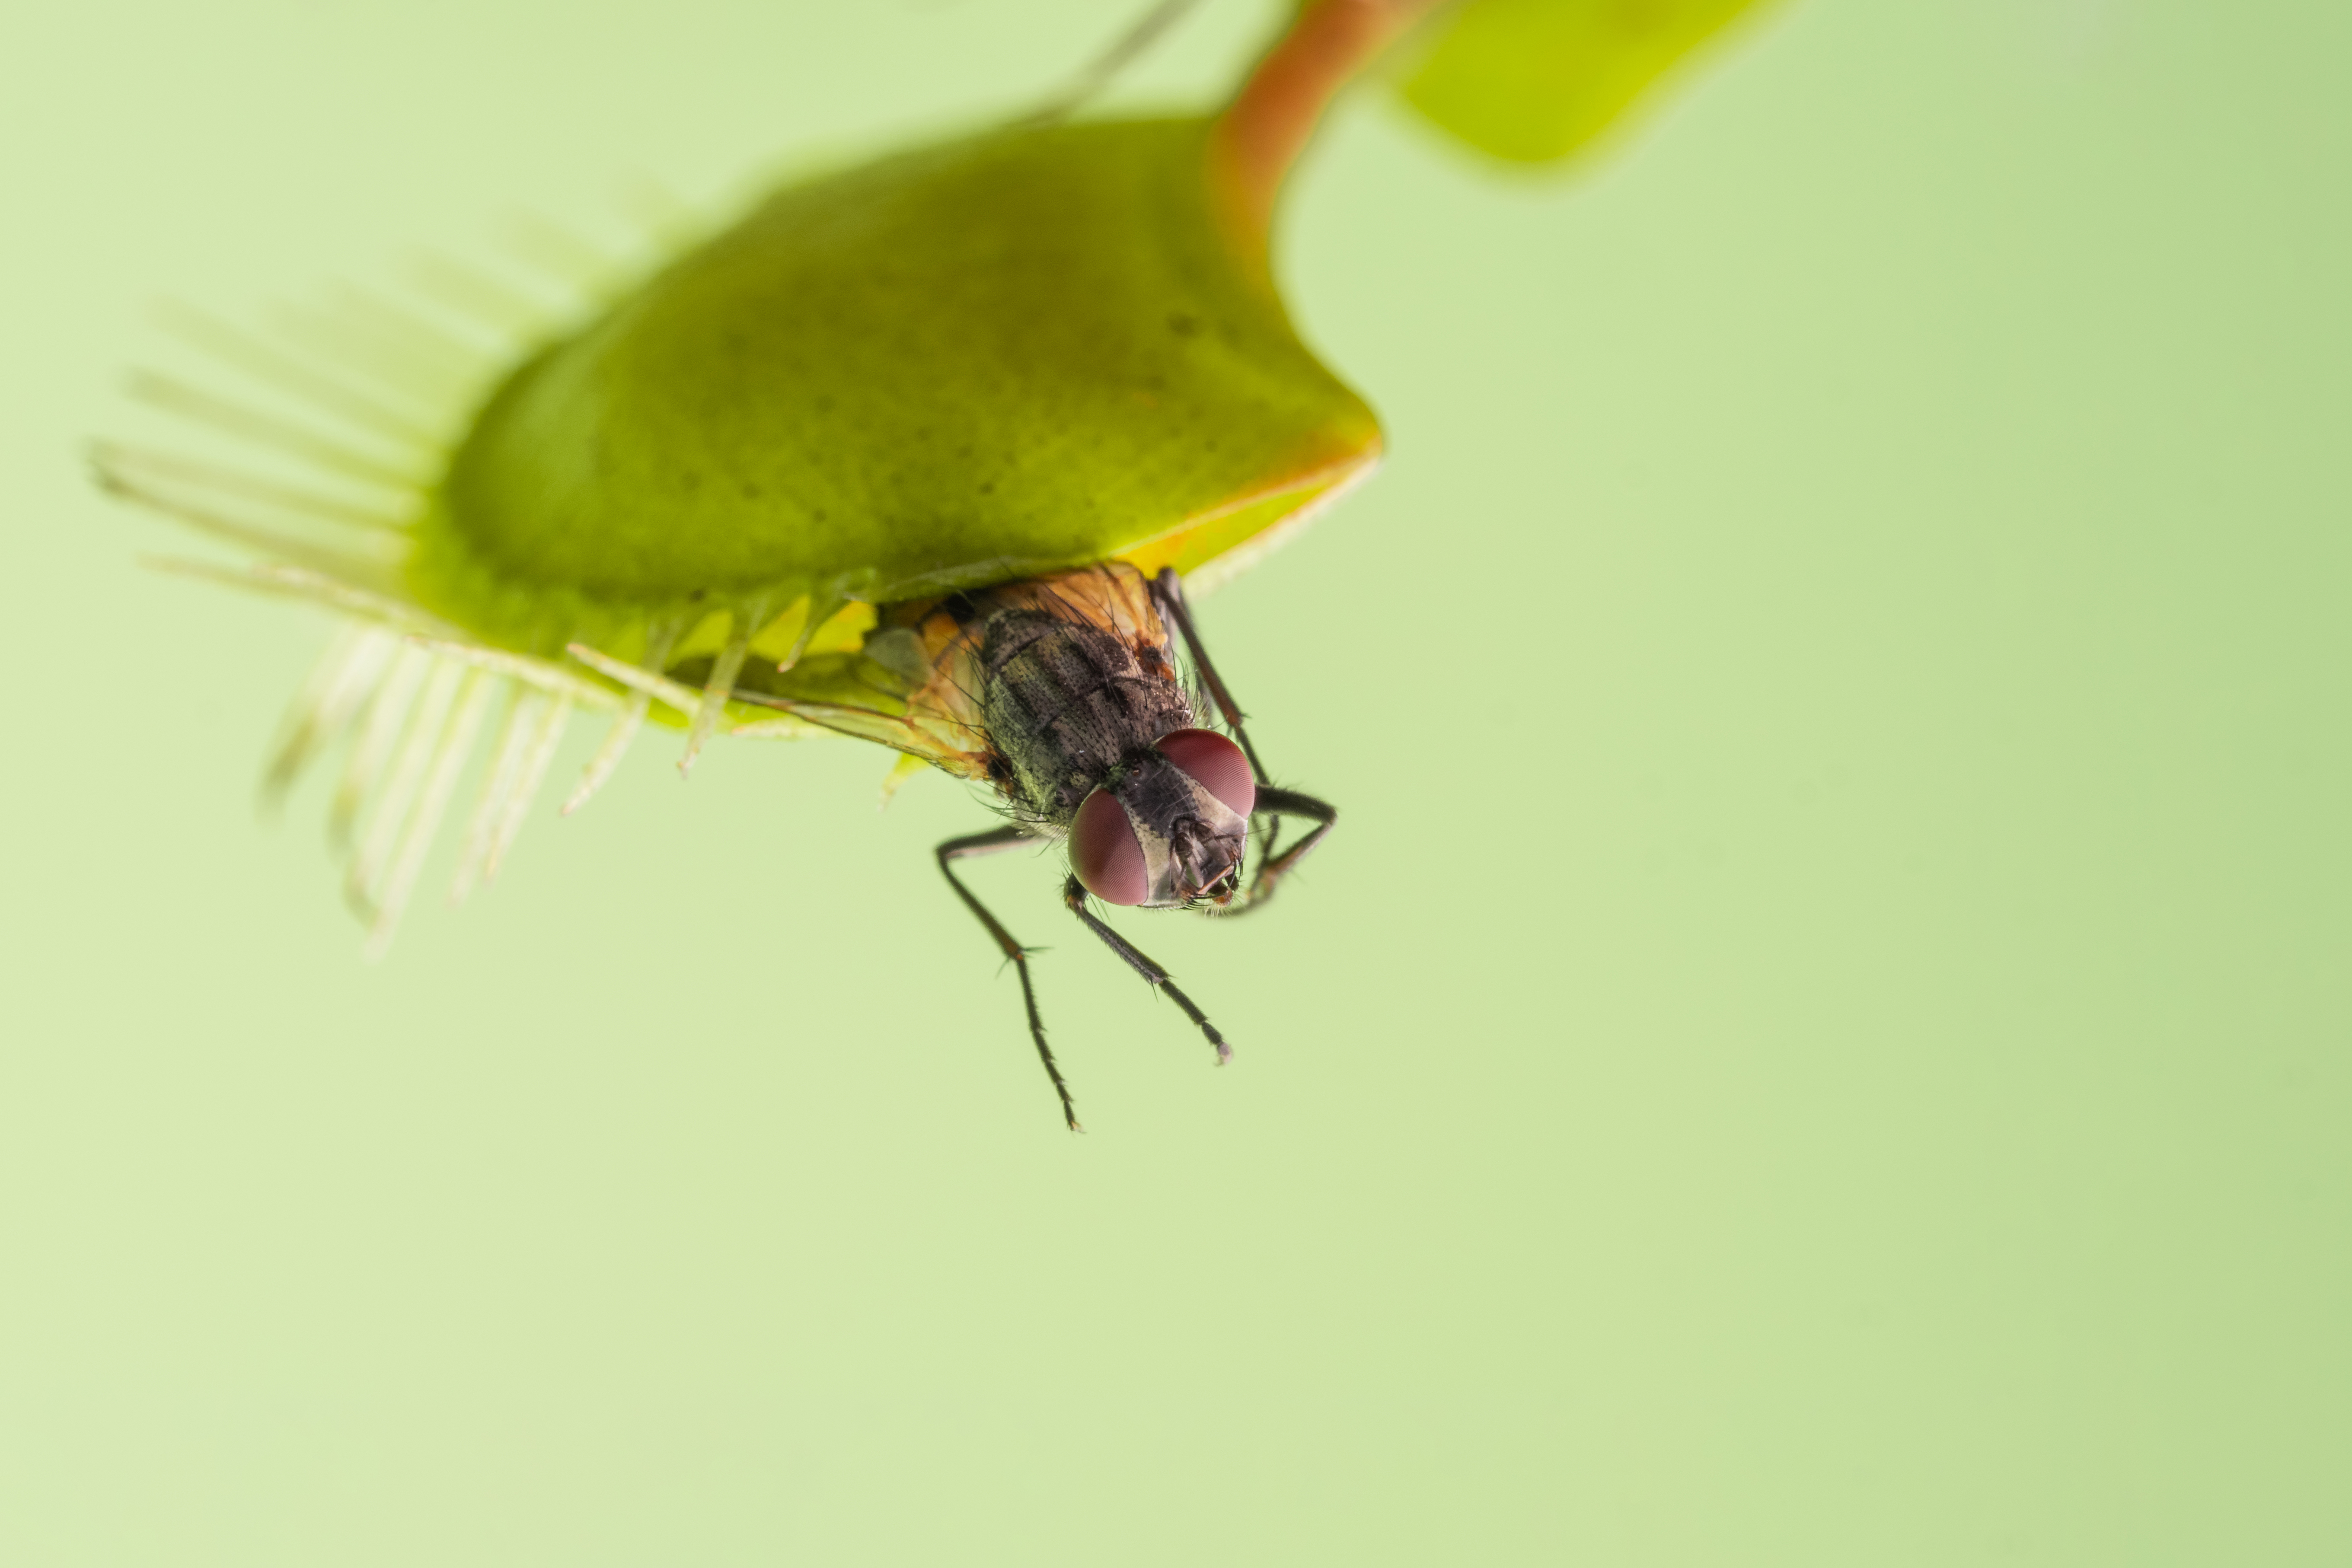 5 Things You Didn't Know About Venus Flytraps